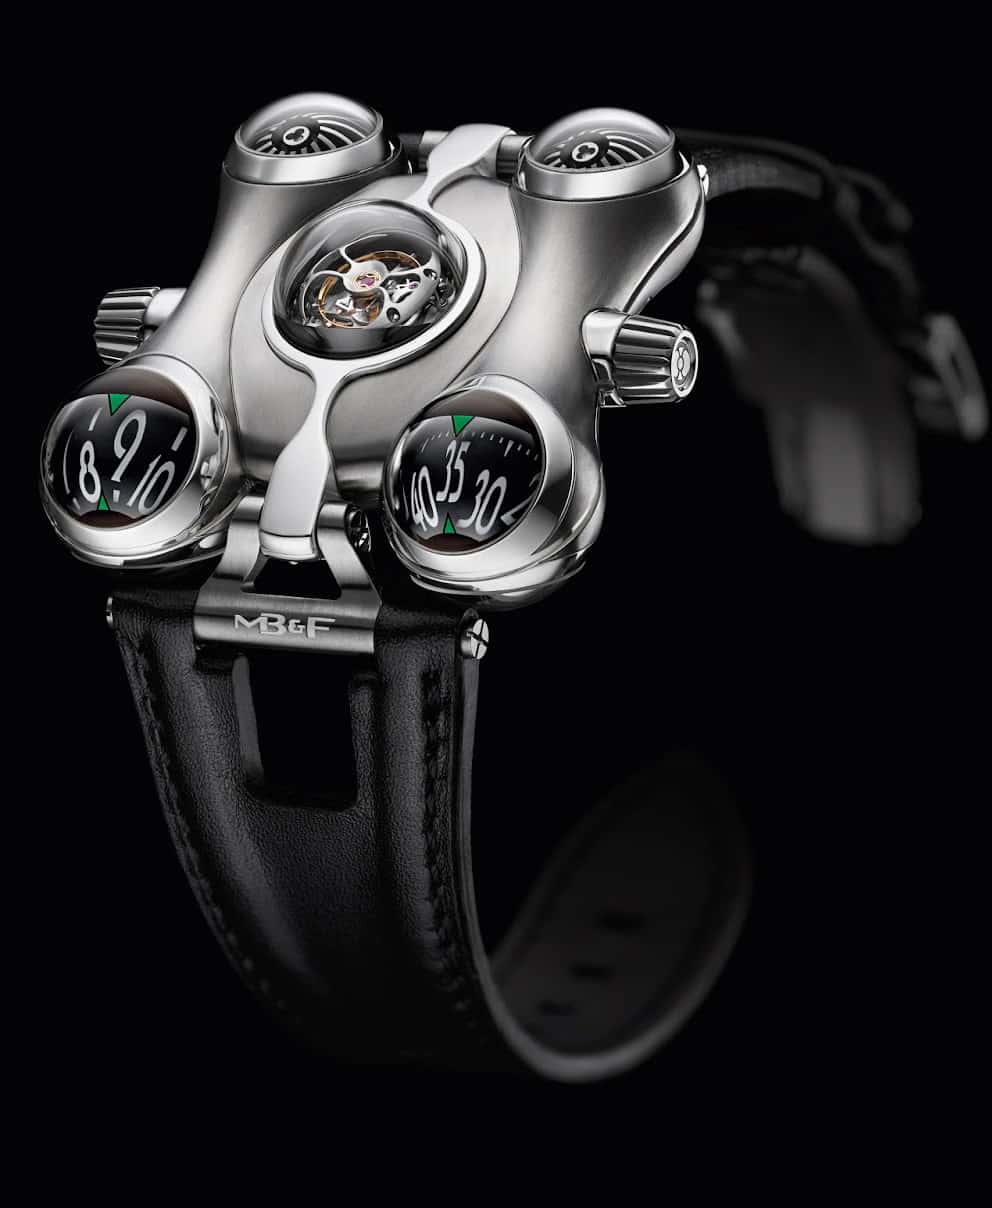 MB&F Horological Machine No.6 (HM6) Space Pirate Watch Cool Expensive Stuff to Buy